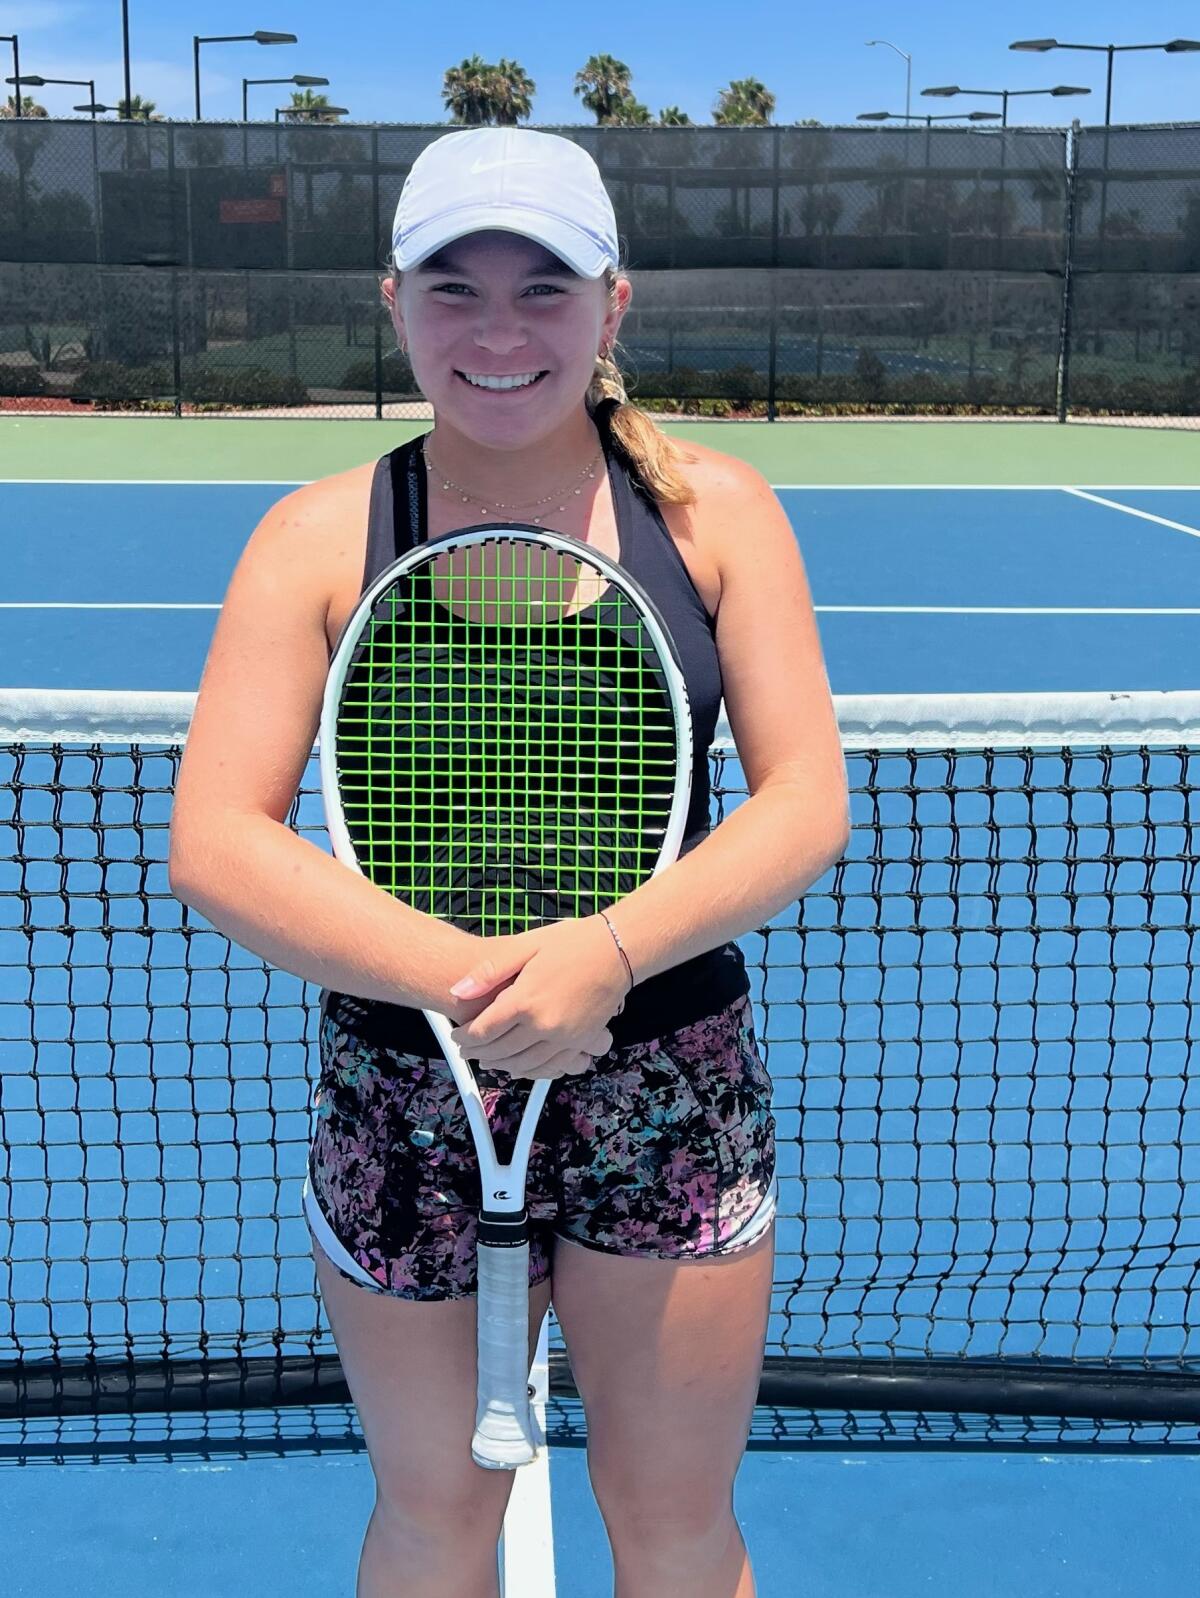 Emily Deming of Fallbrook is playing in junior national tennis tournament beginning Saturday in San Diego.